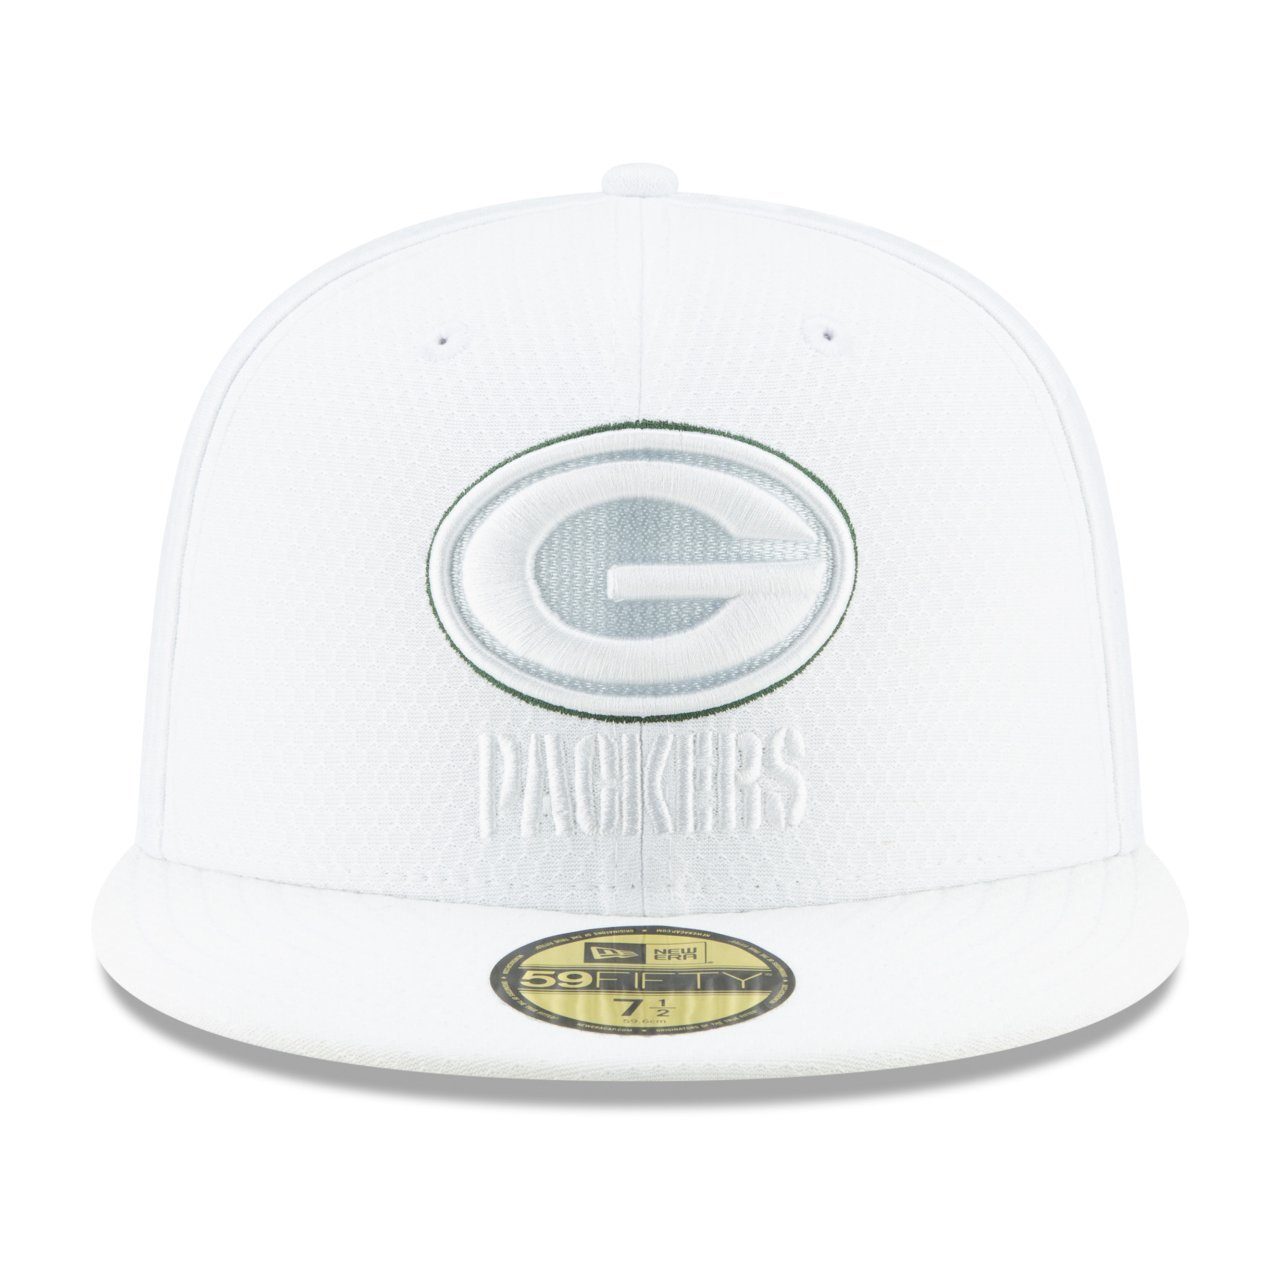 New Era Fitted Cap Packers Green NFL PLATINUM Bay 59Fifty Sideline